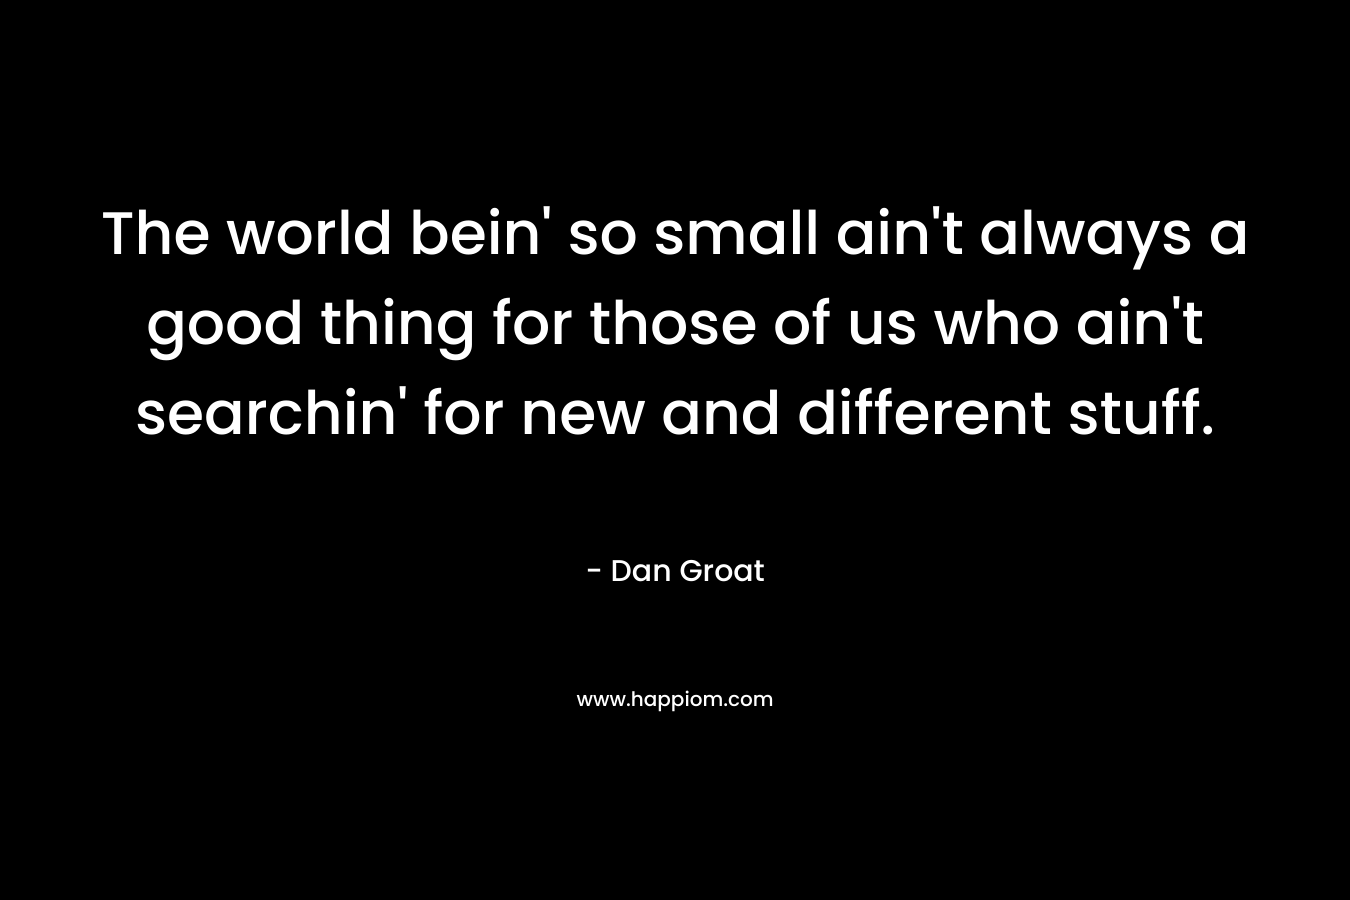 The world bein' so small ain't always a good thing for those of us who ain't searchin' for new and different stuff.